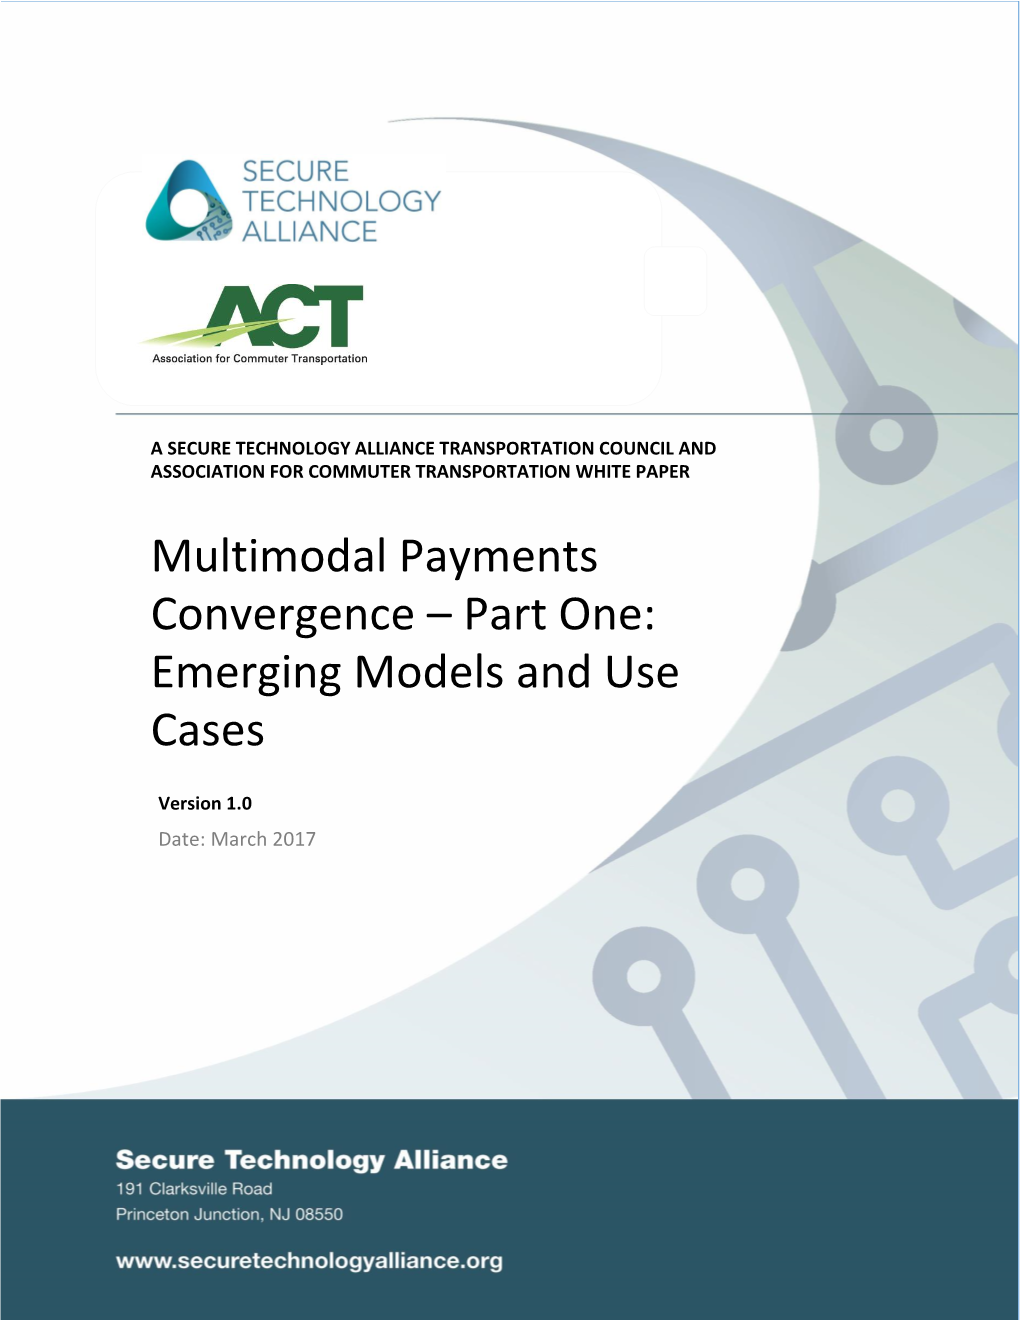 Multimodal Payments Convergence – Part One: Emerging Models and Use Cases